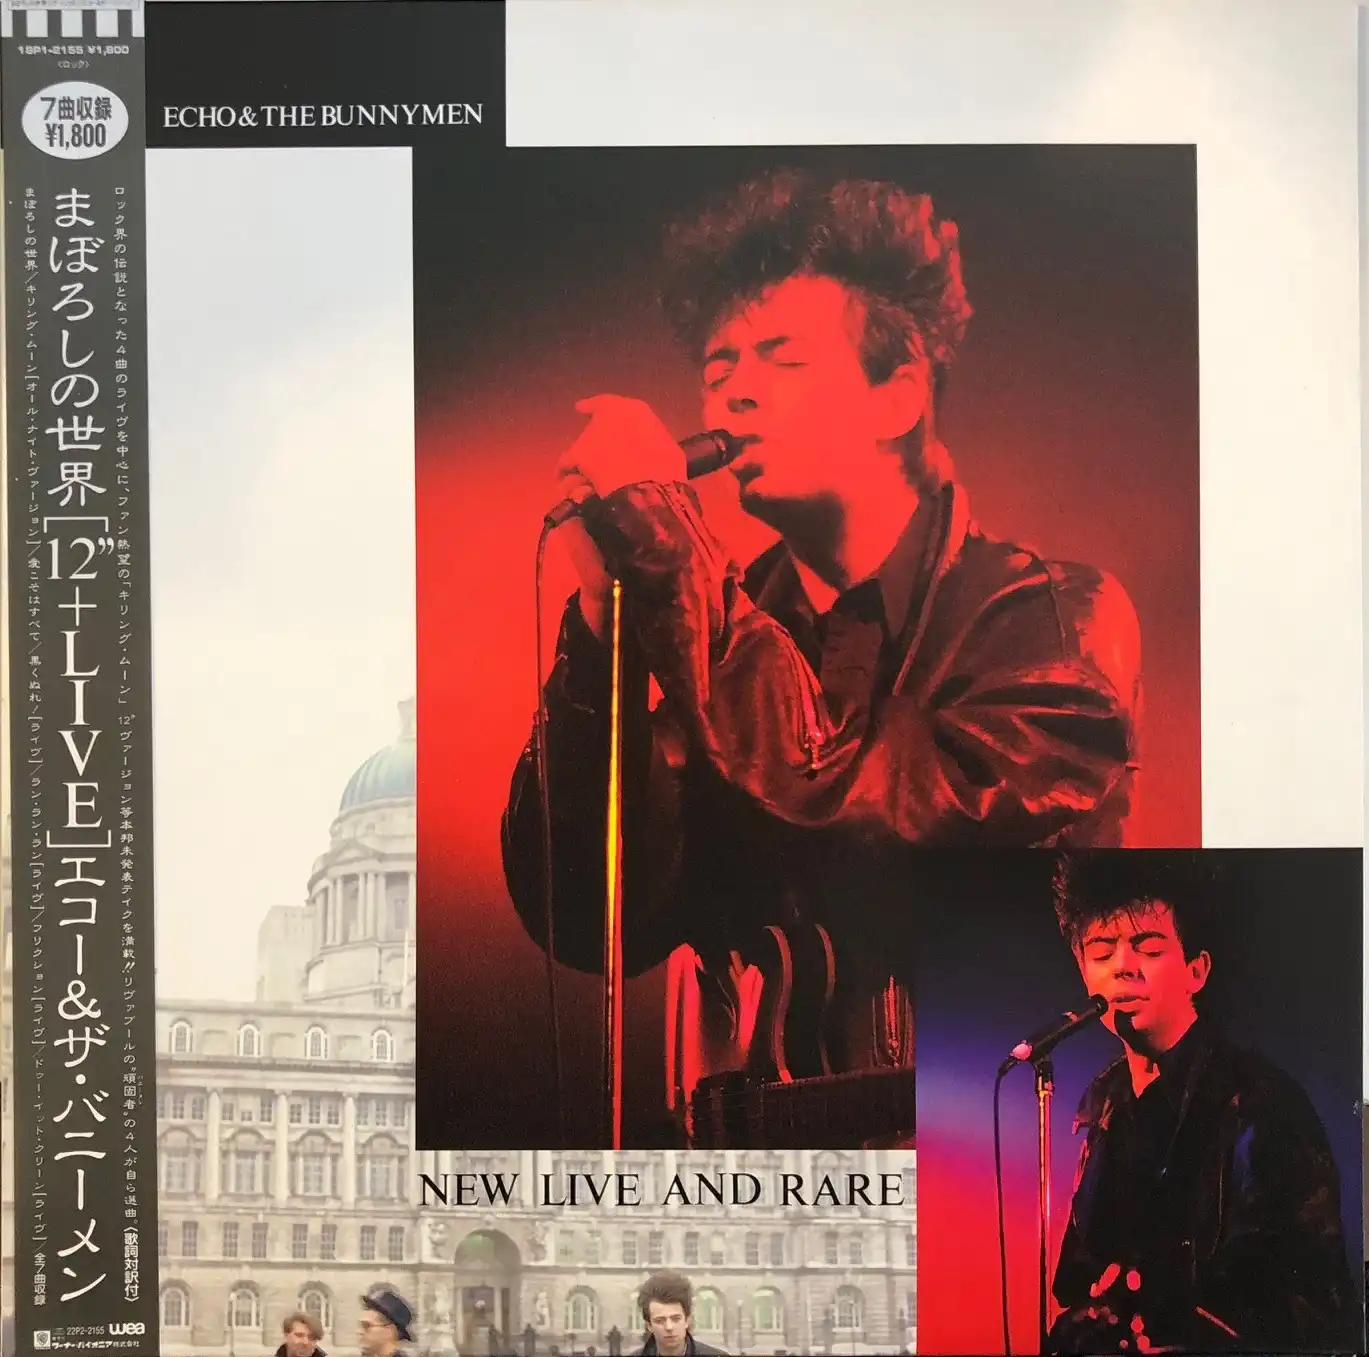 ECHO & THE BUNNYMEN / NEW LIVE AND RARE